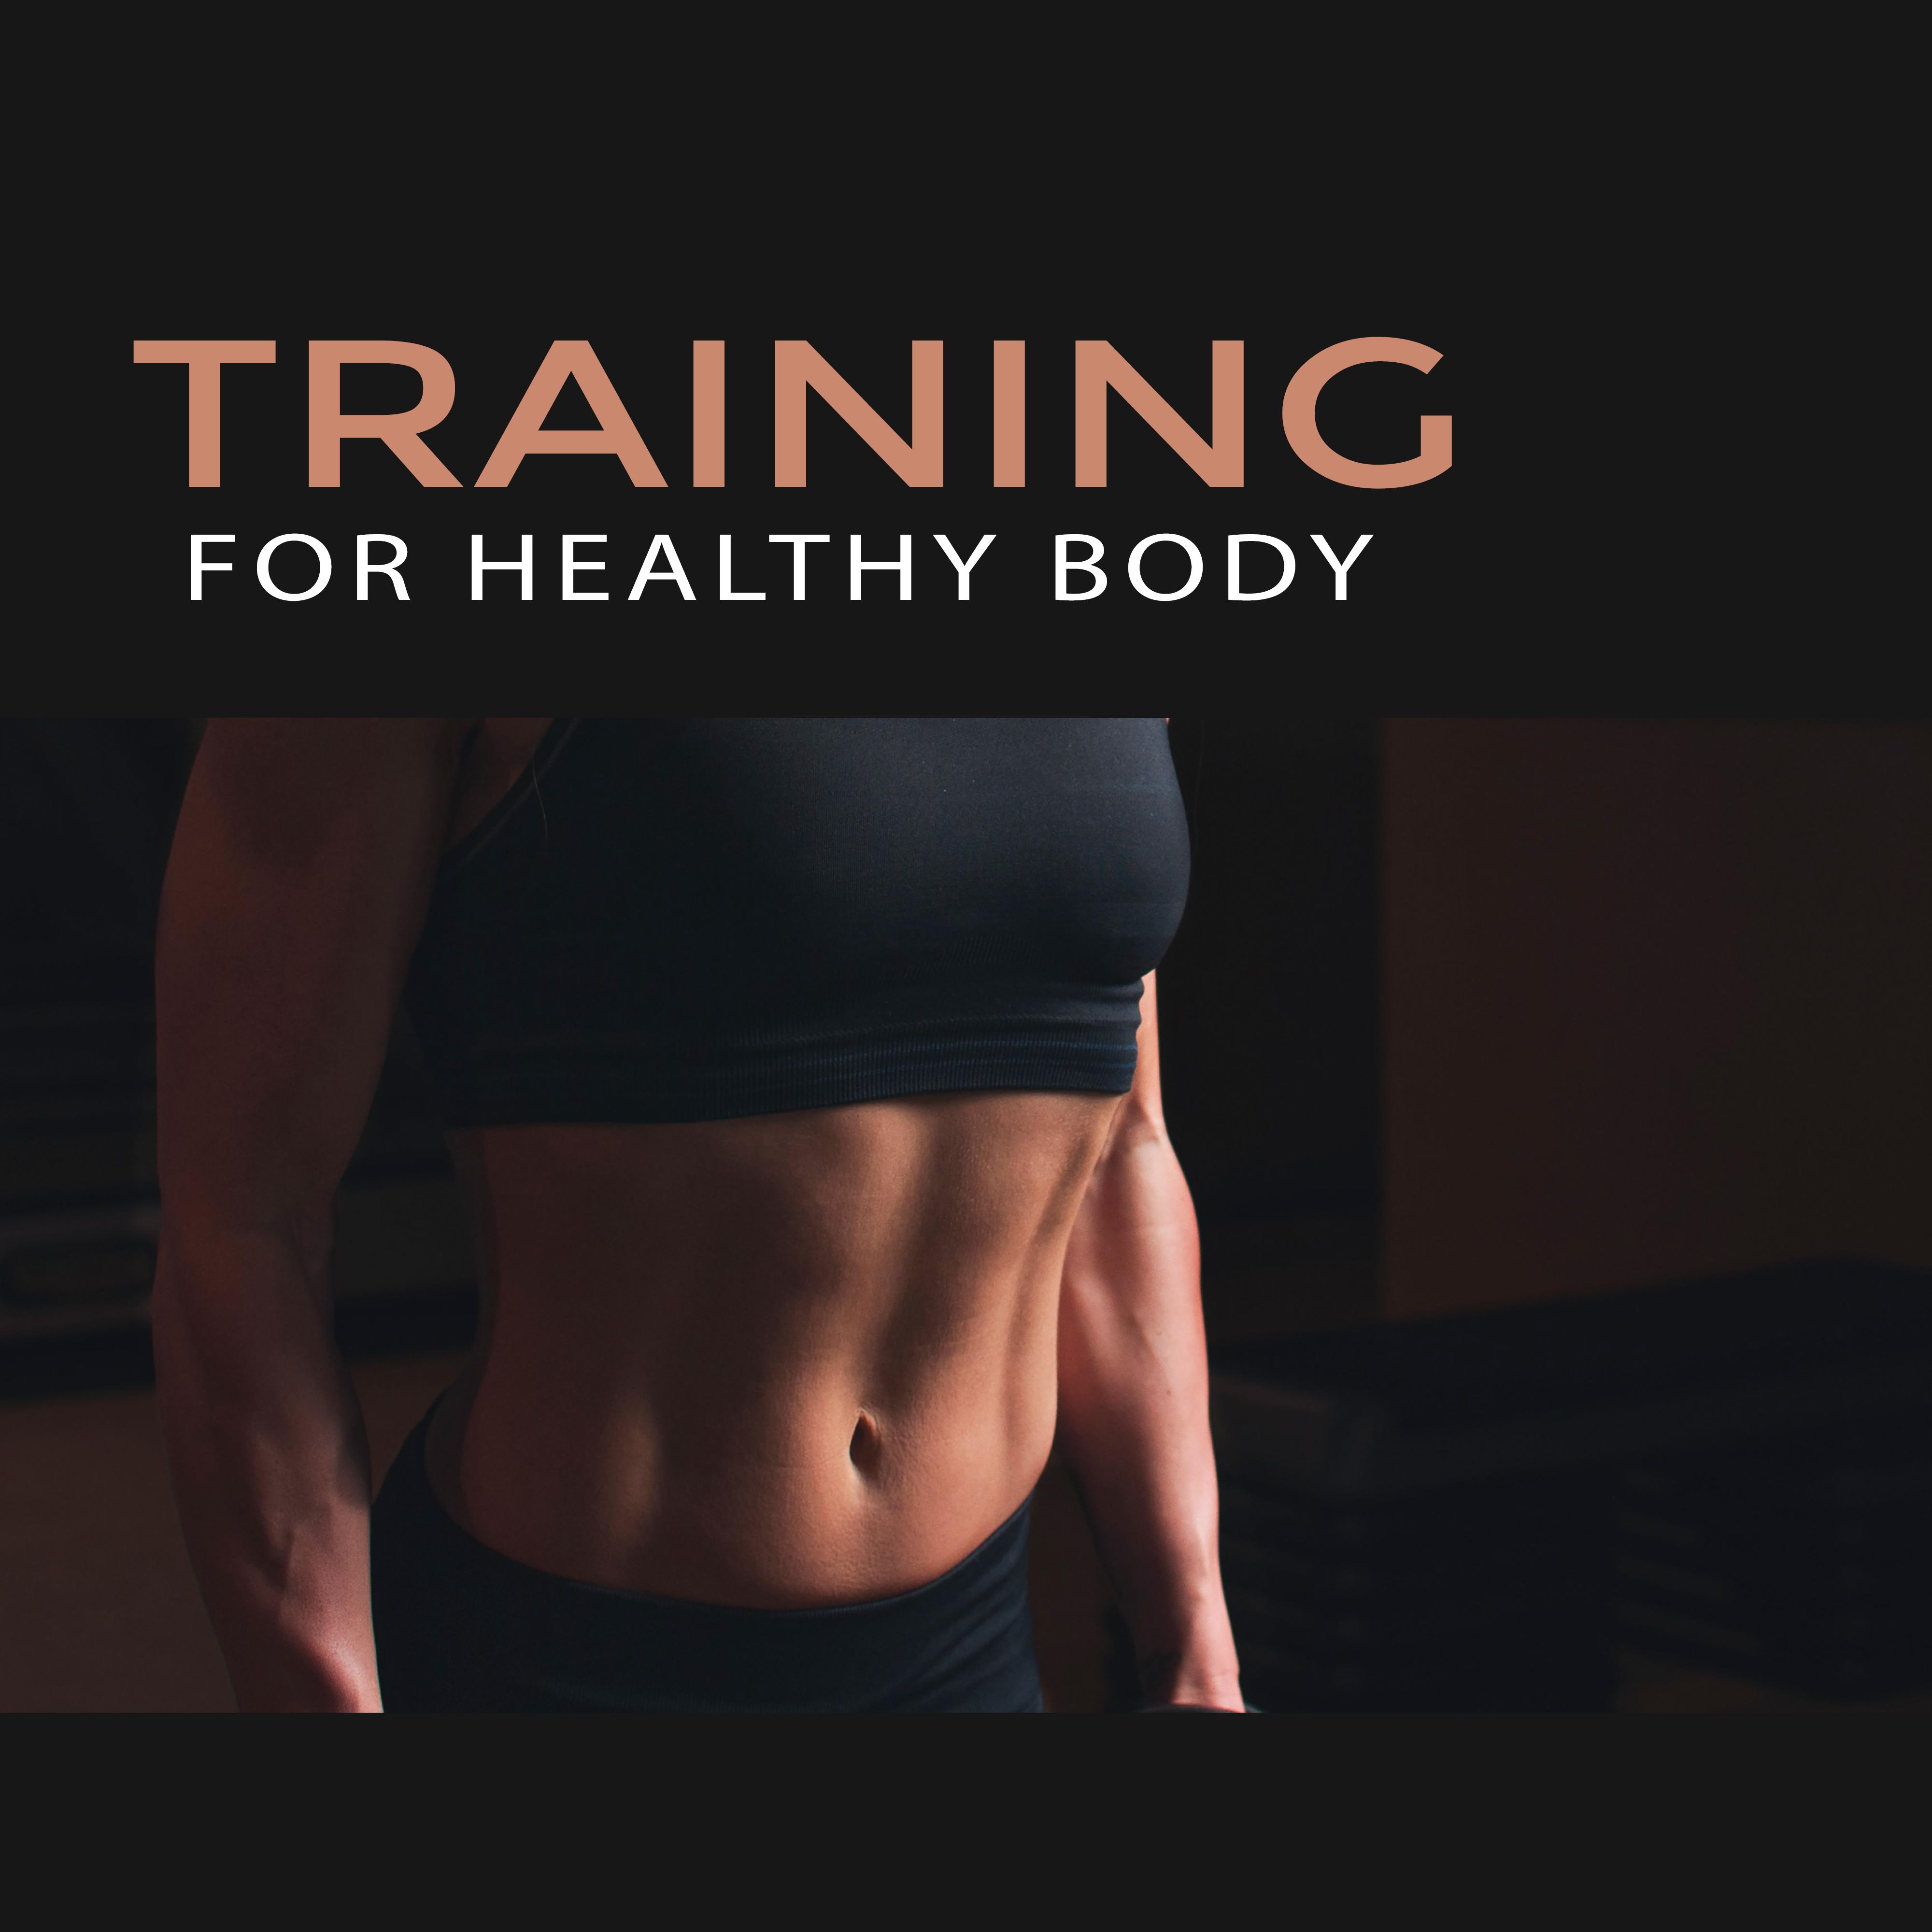 Training for Healthy Body  Music for Fitness, Gym, Running Hits, Workout Music, Peaceful Mind